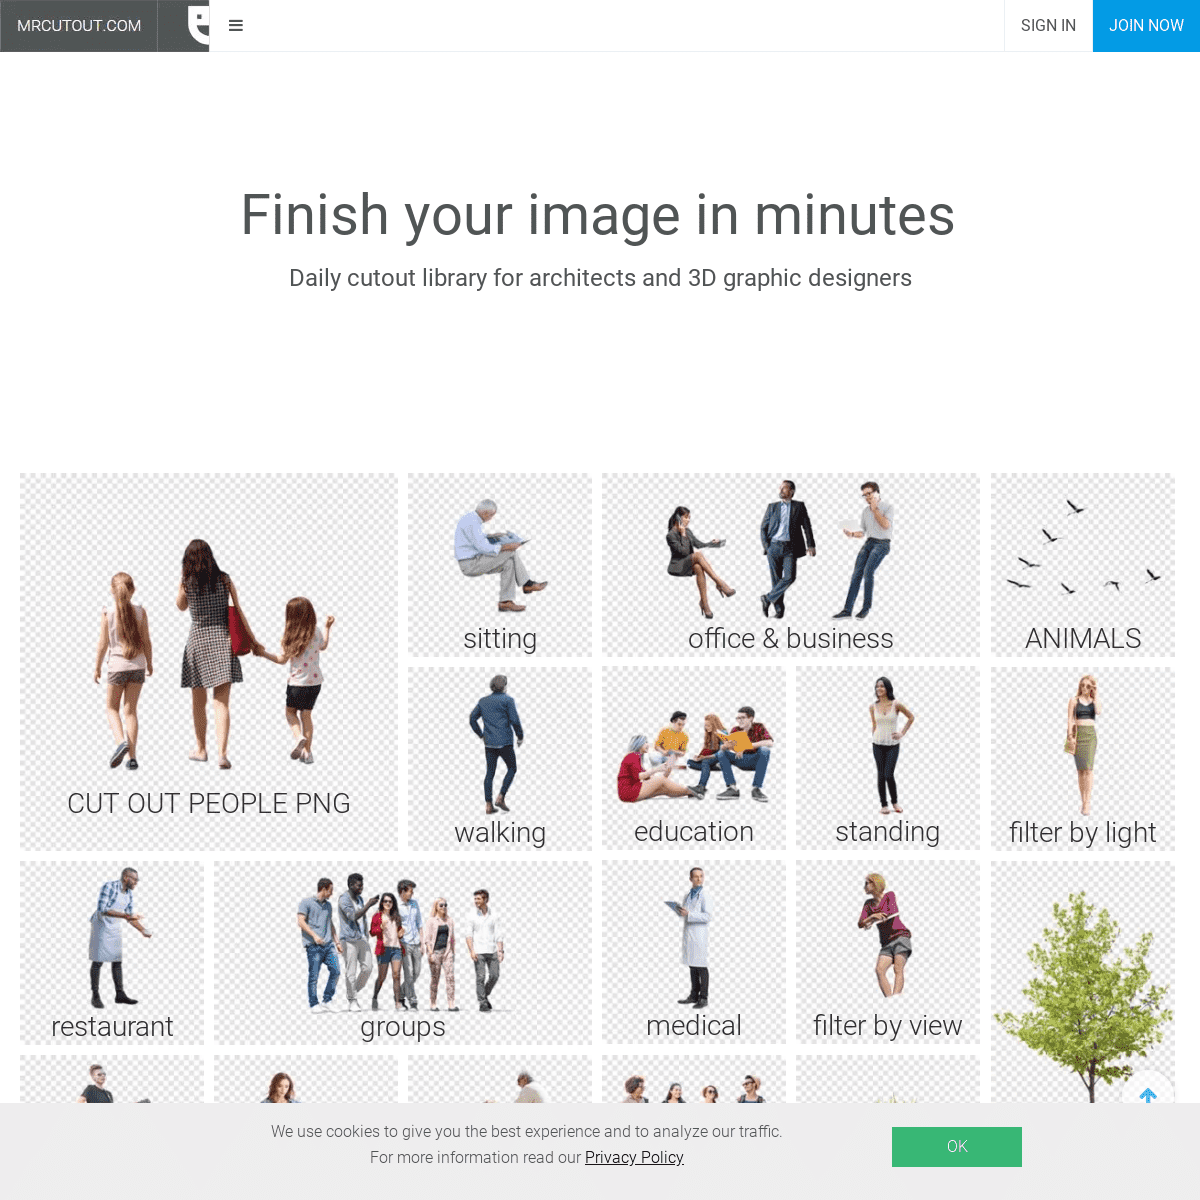 MrCutout.com | Thousands of design quality photo cut outs, ready to use immediately! Free.